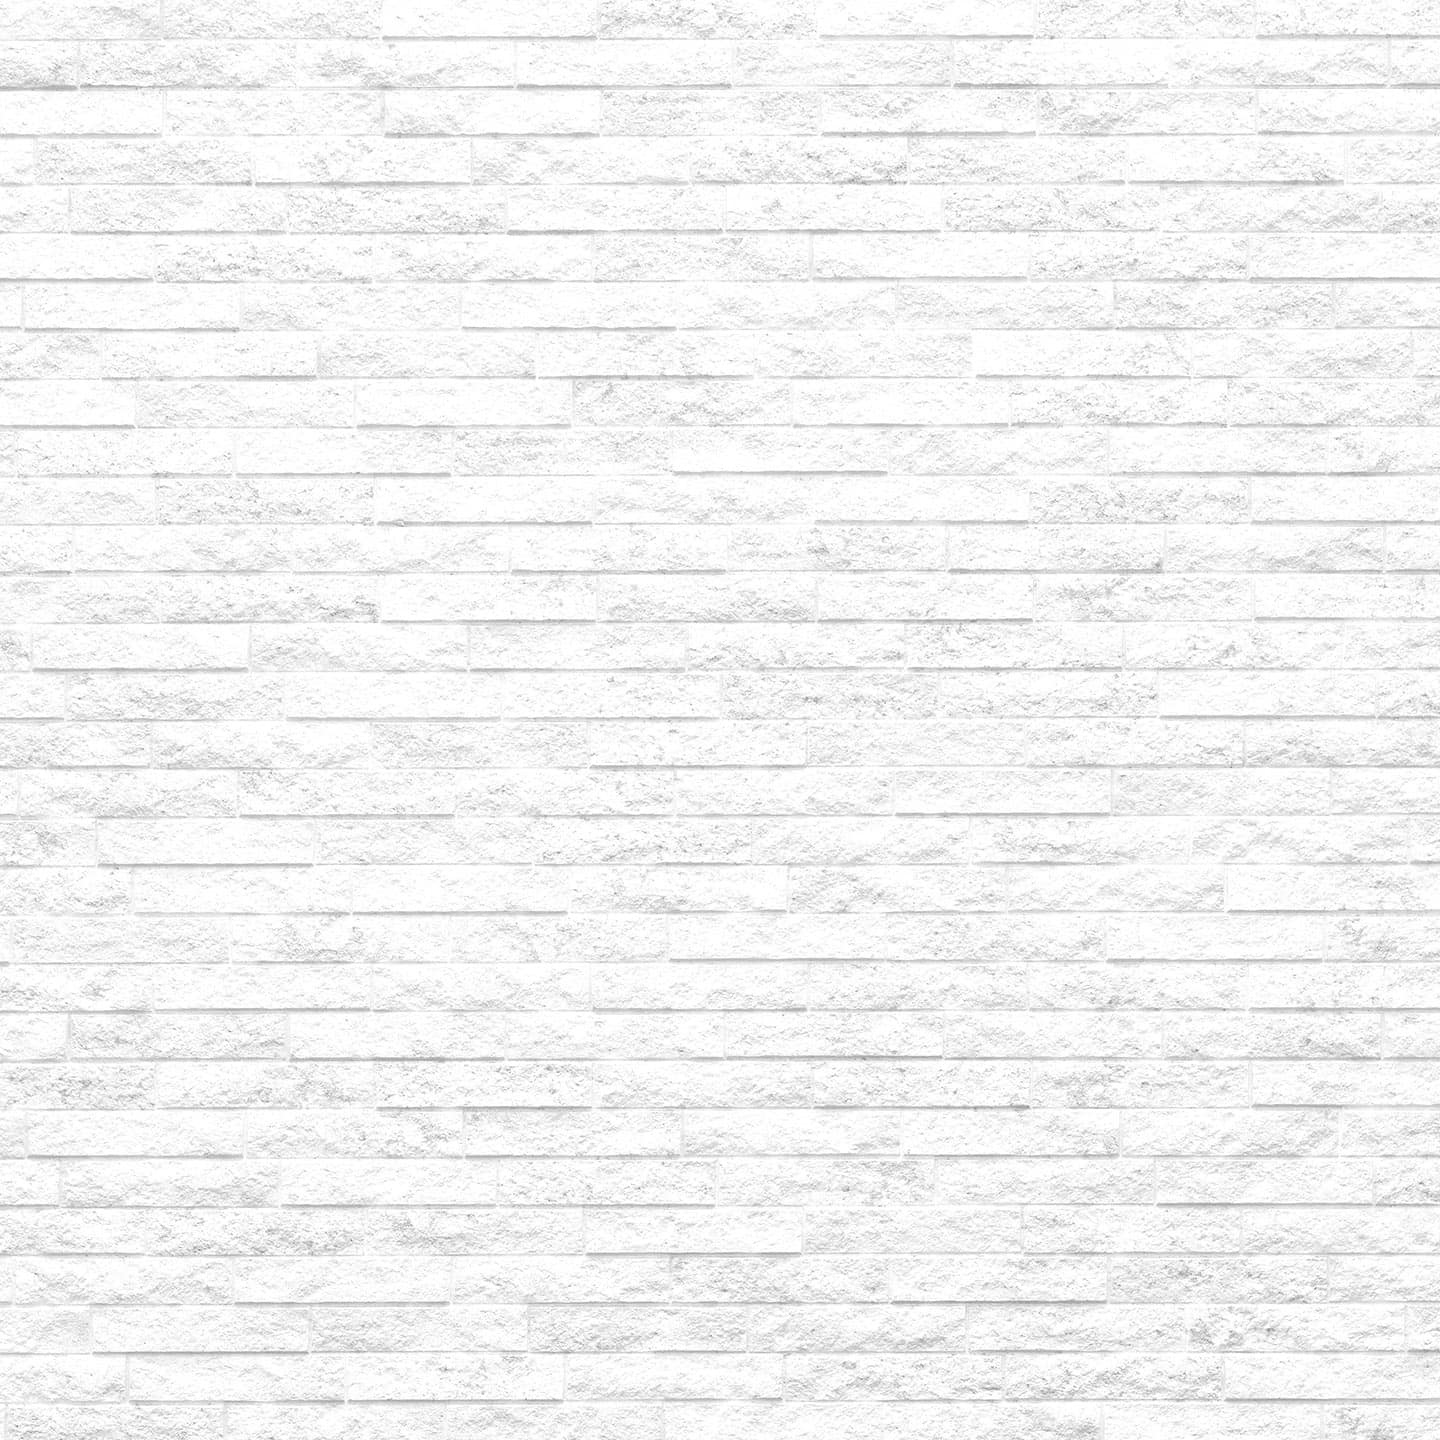 1046364 drawing, monochrome, wall, wood, text, pattern, texture, textured,  cork, Brick, material, design, line, handwriting, number, sketch, black and  white, monochrome photography, font - Rare Gallery HD Wallpapers